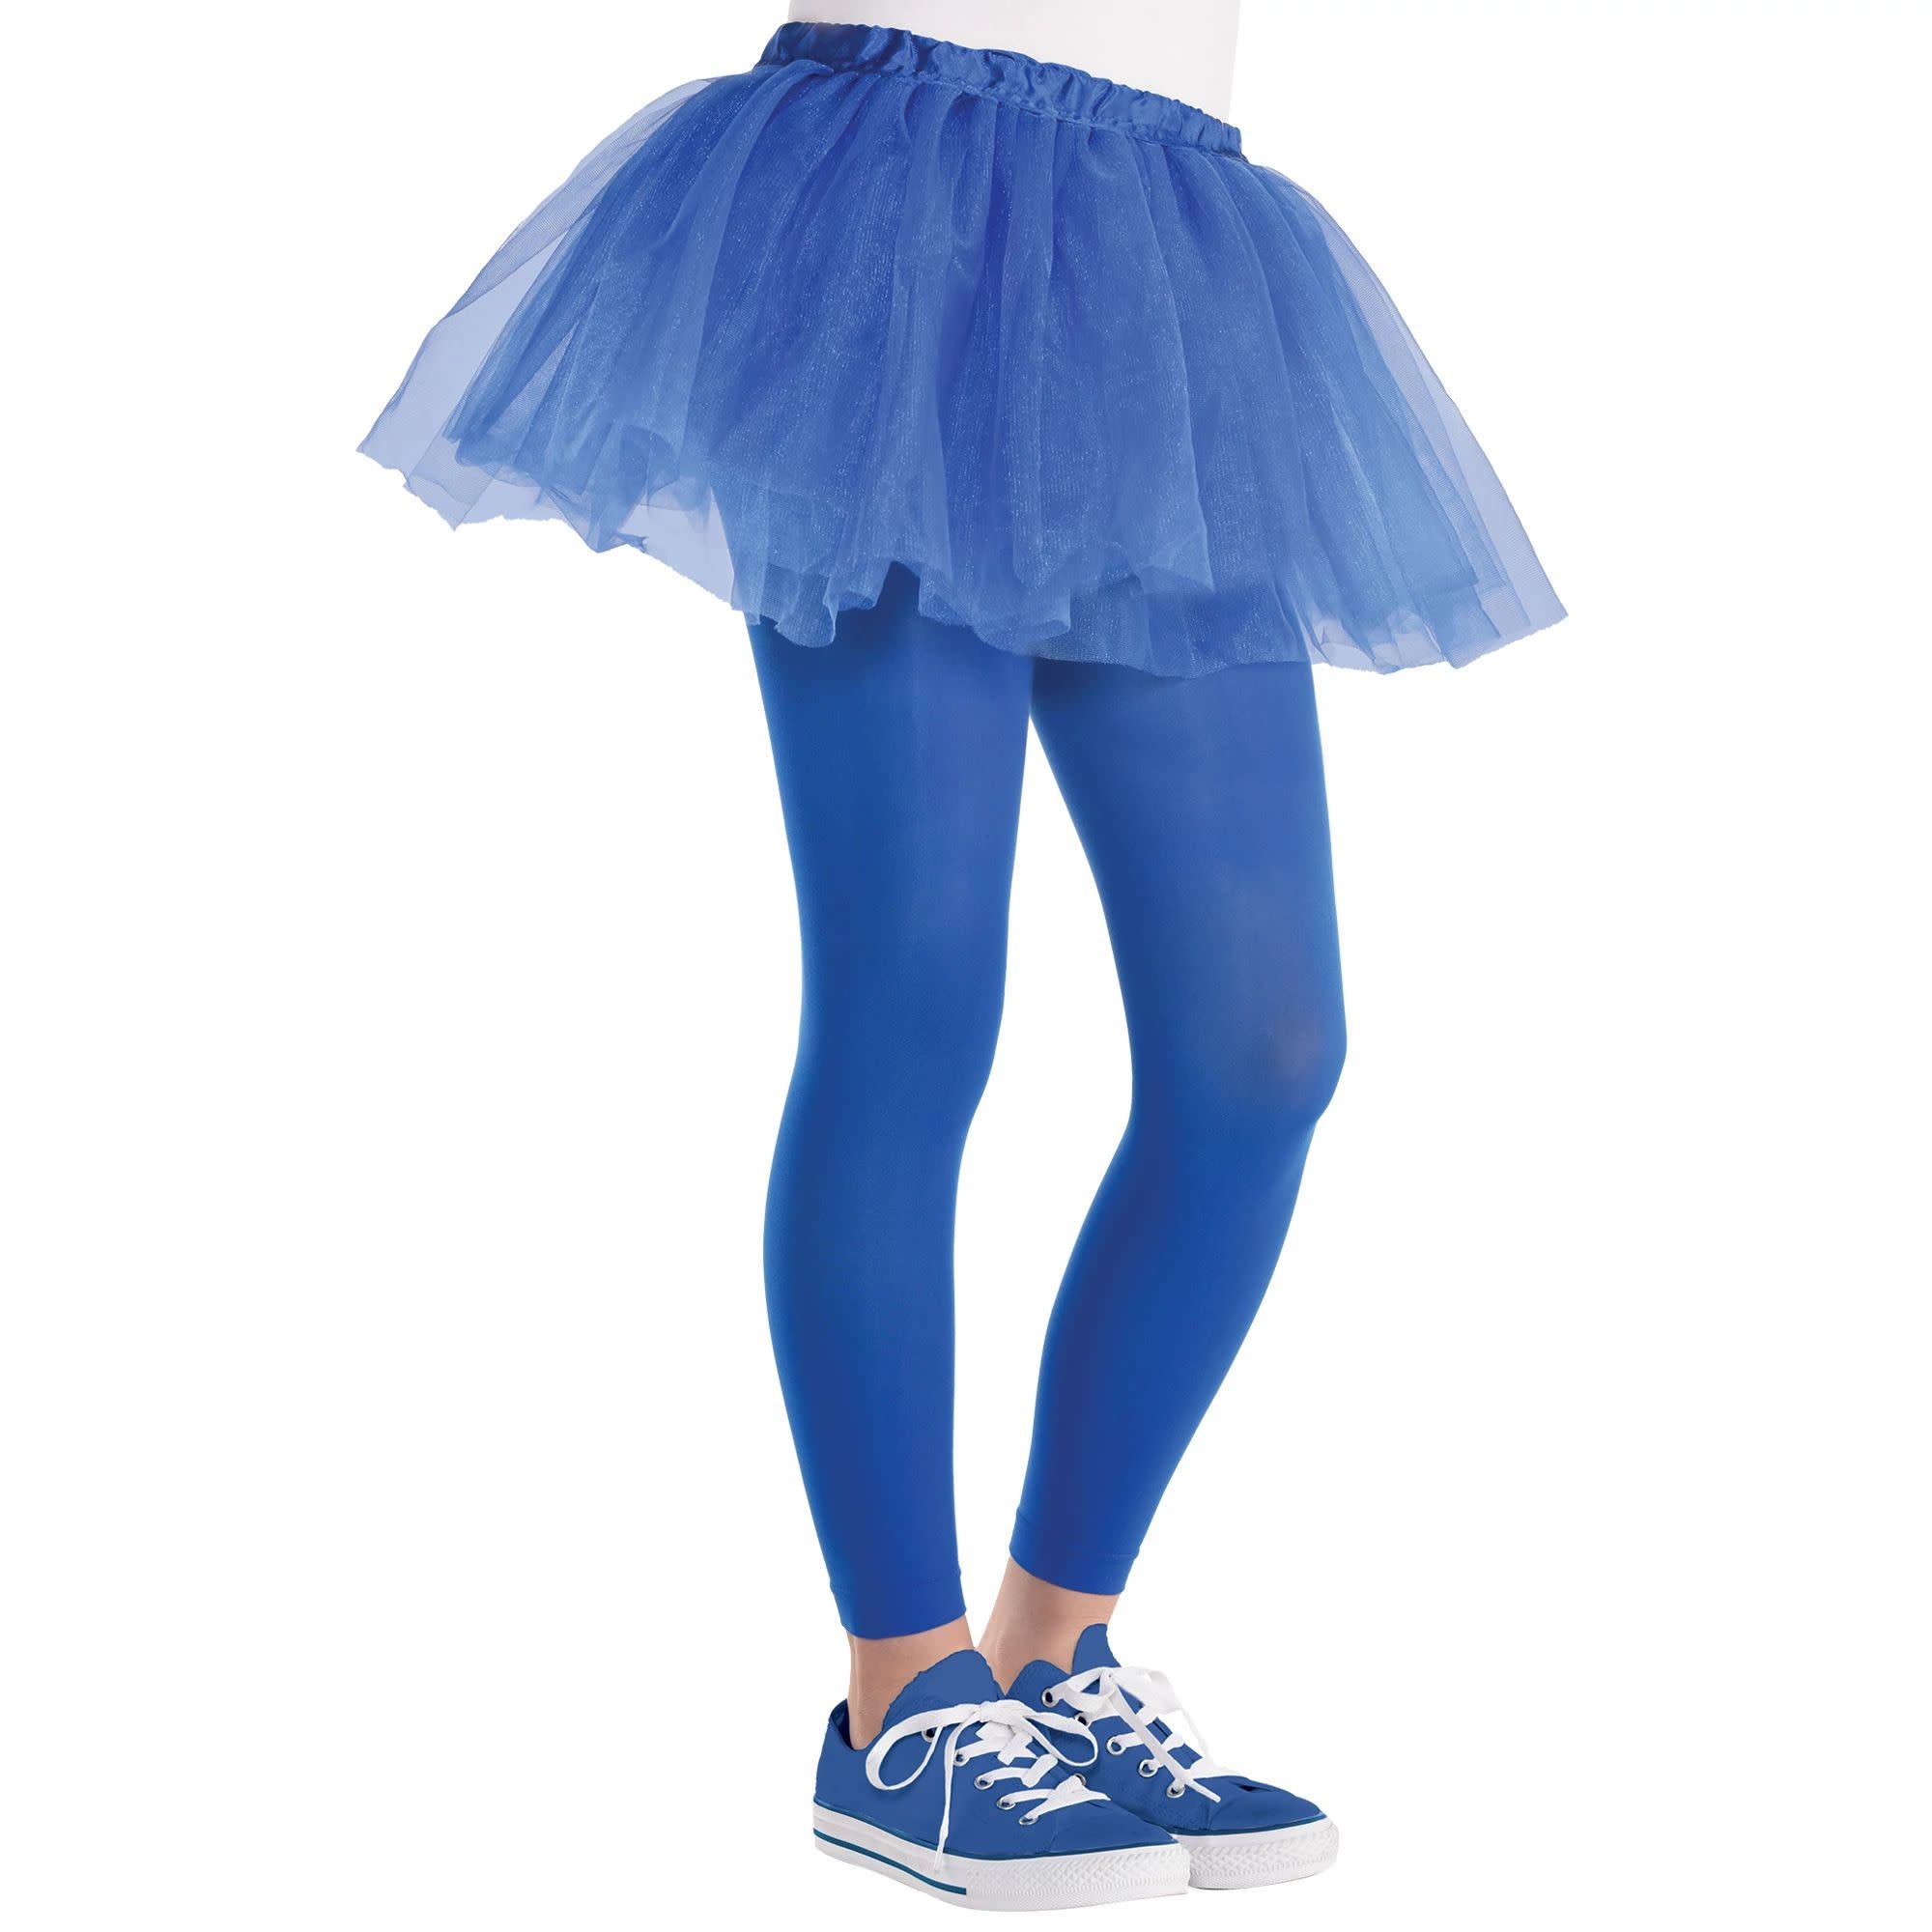 Blue Footless Tights - Child